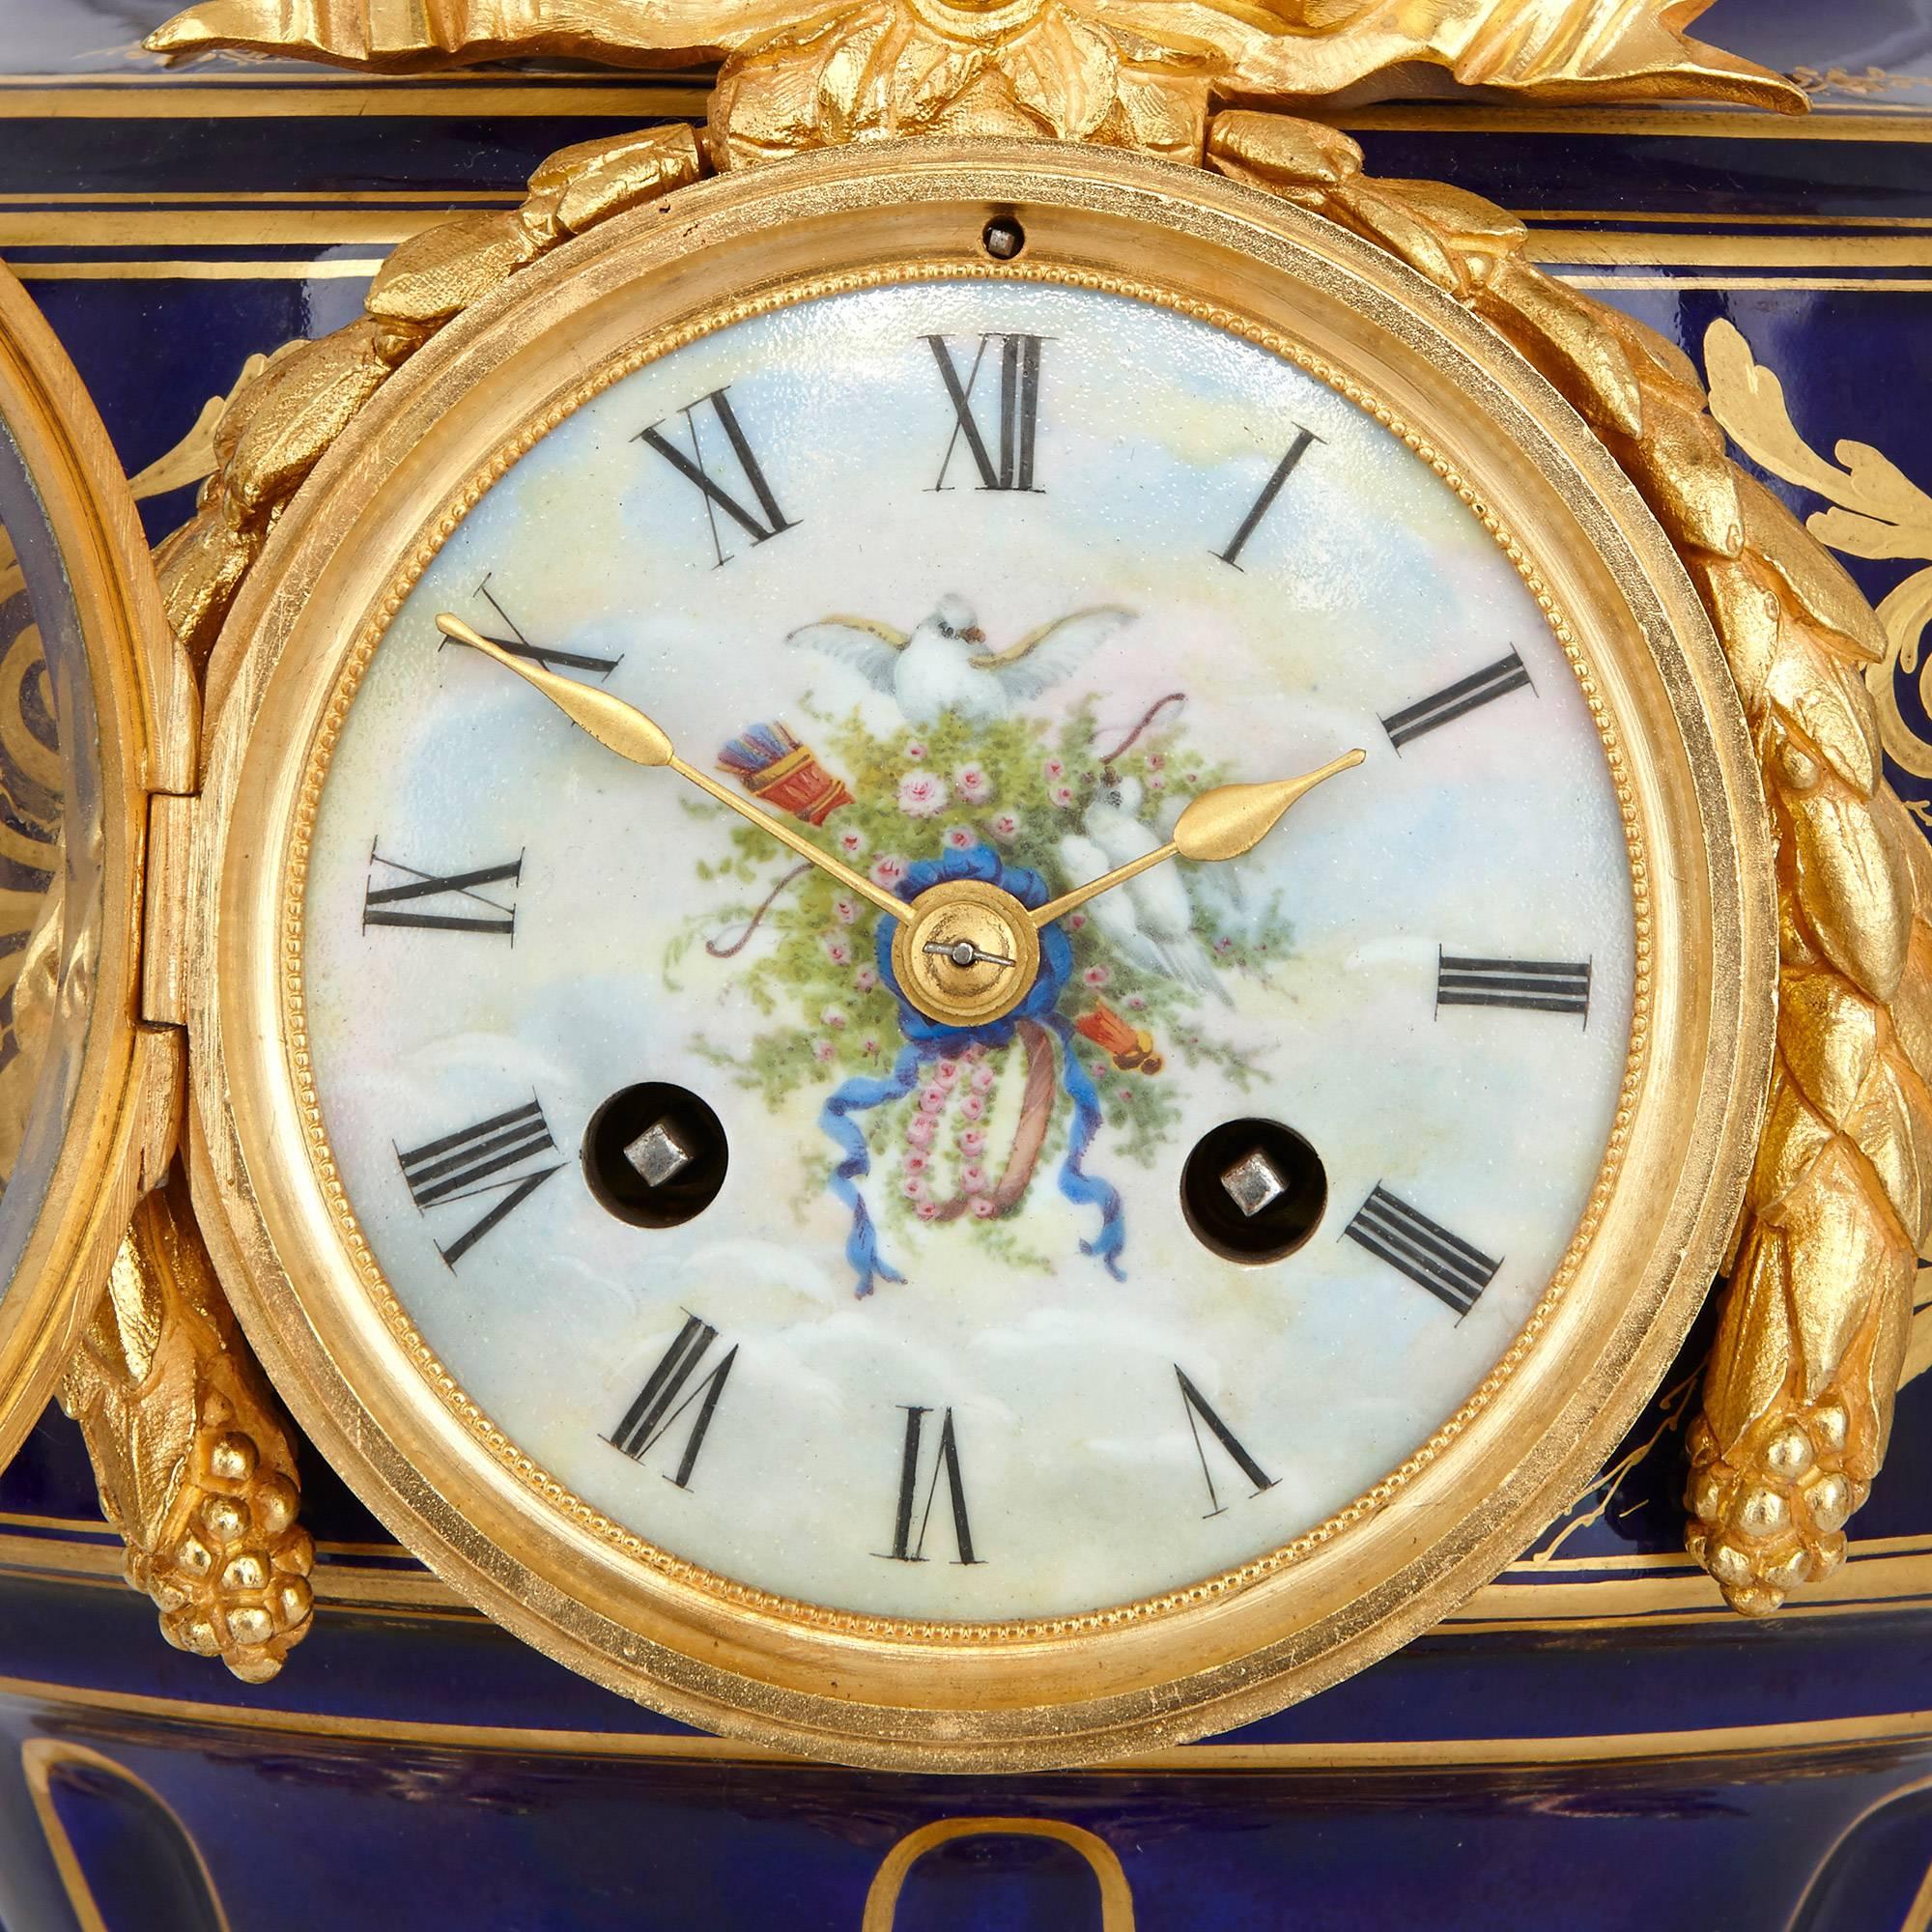 This fantastic clock garniture is a truly exceptional piece of design, which takes after the elegant beauty of the work of the Sevres porcelain Manufactory. Comprising a set of three beautifully decorated vases, the unusual garniture is also mounted